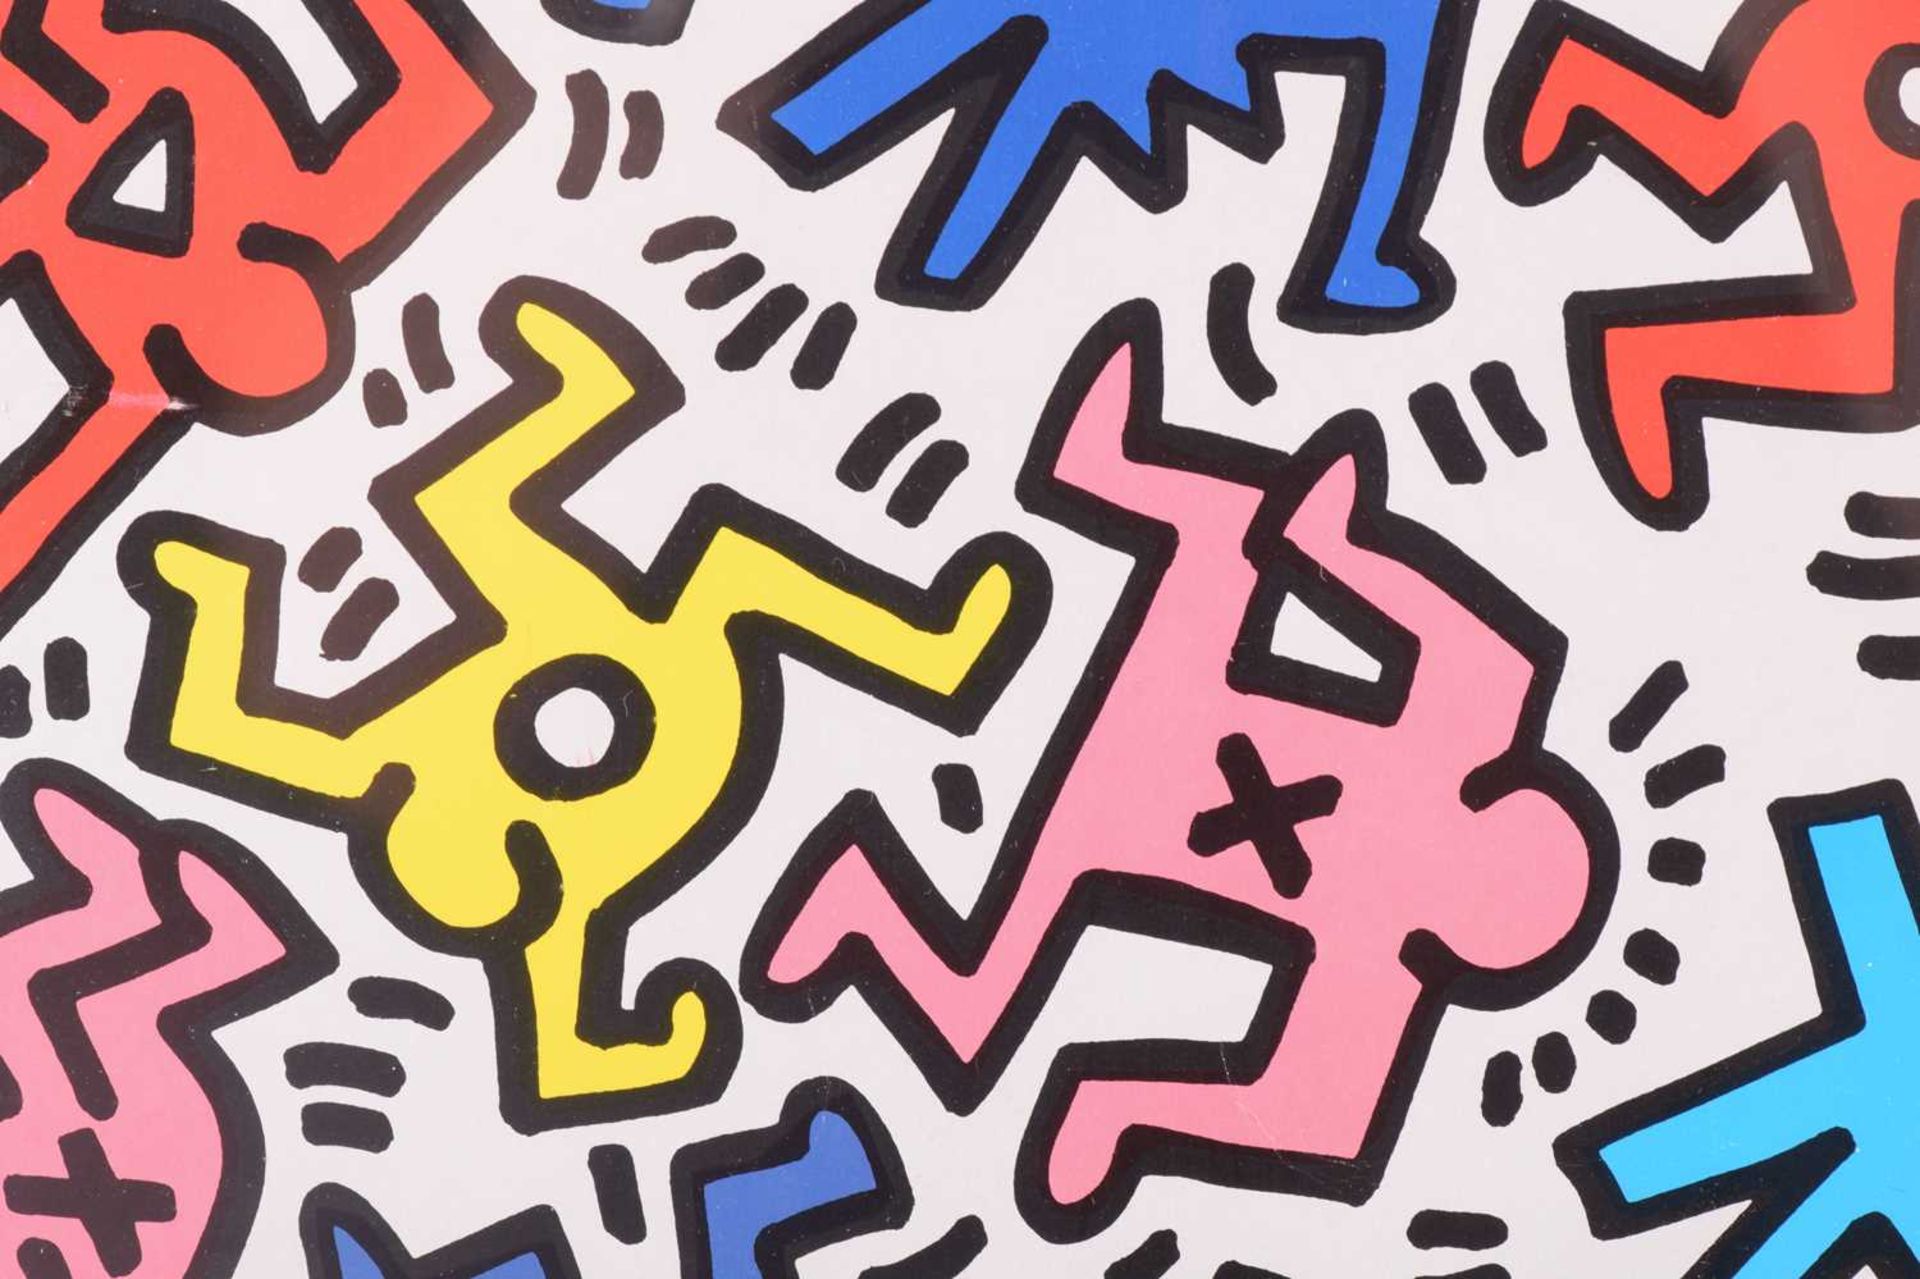 Keith Haring (1958-1990), 'Dancing People', colour print, 38 cm x 26.5 cm framed and glazed. - Image 5 of 7